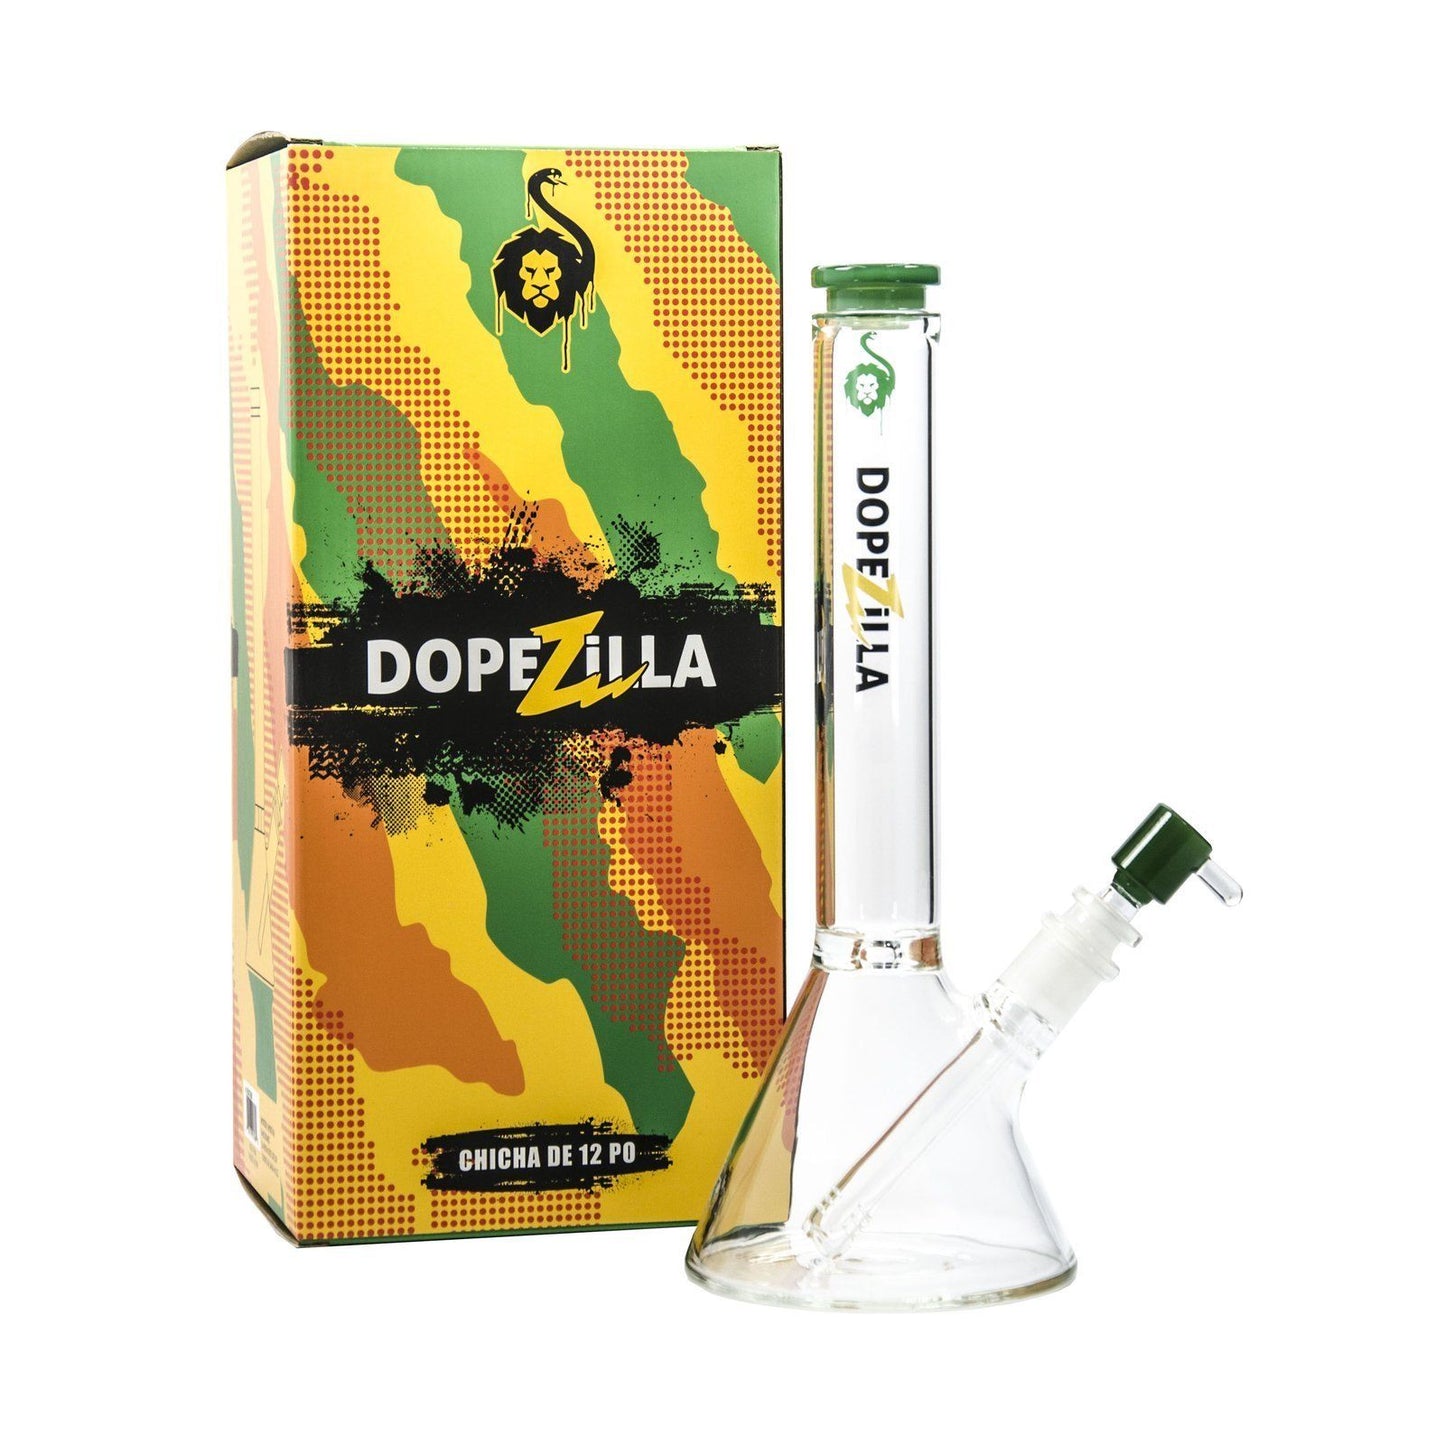 Dopezilla-Chimera-Water Pipe-12 Inch-Black Color-(1 Count) Flower Power Packages 